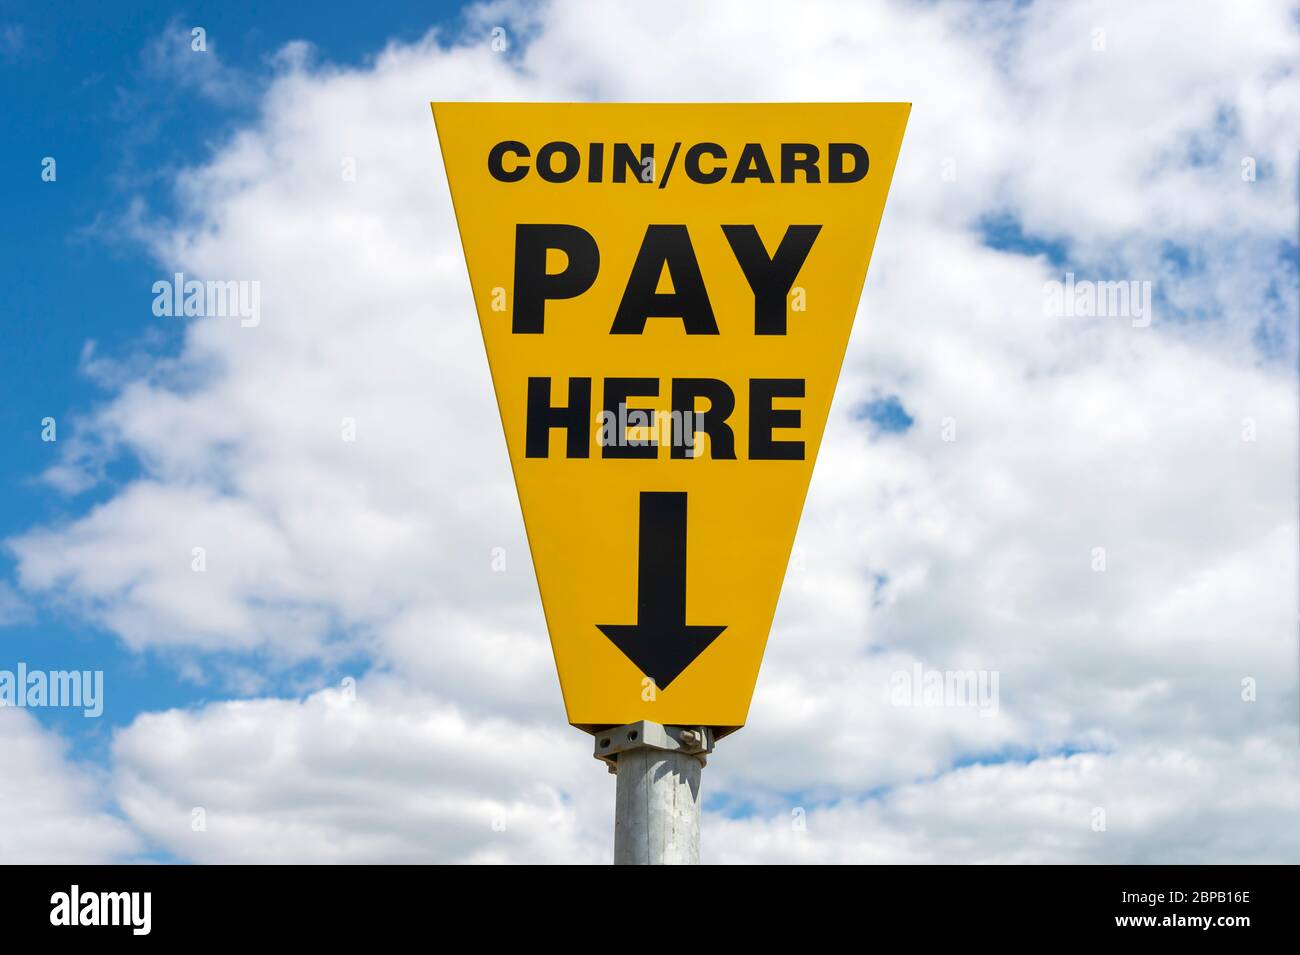 coin / card, pay here sign in an outdoor car park Stock Photo